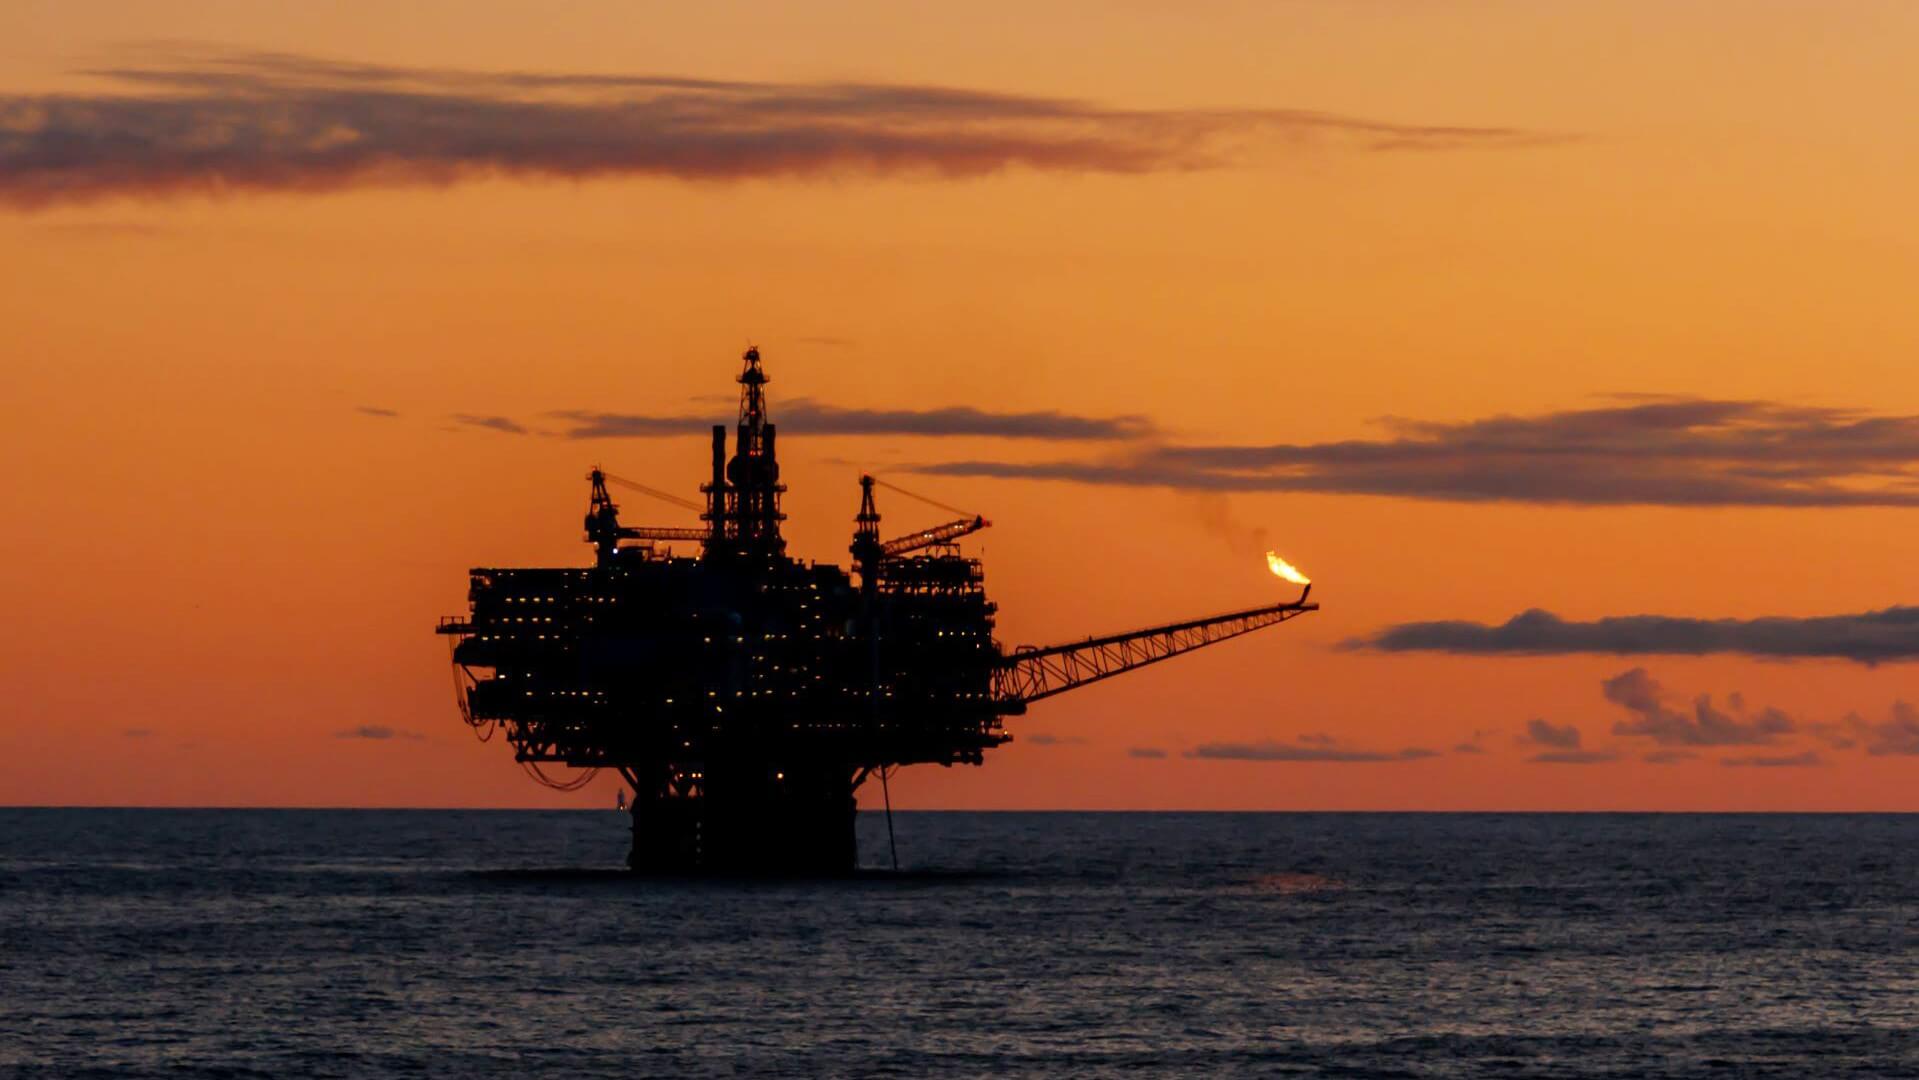 Offshore platform with gas flare at sunset